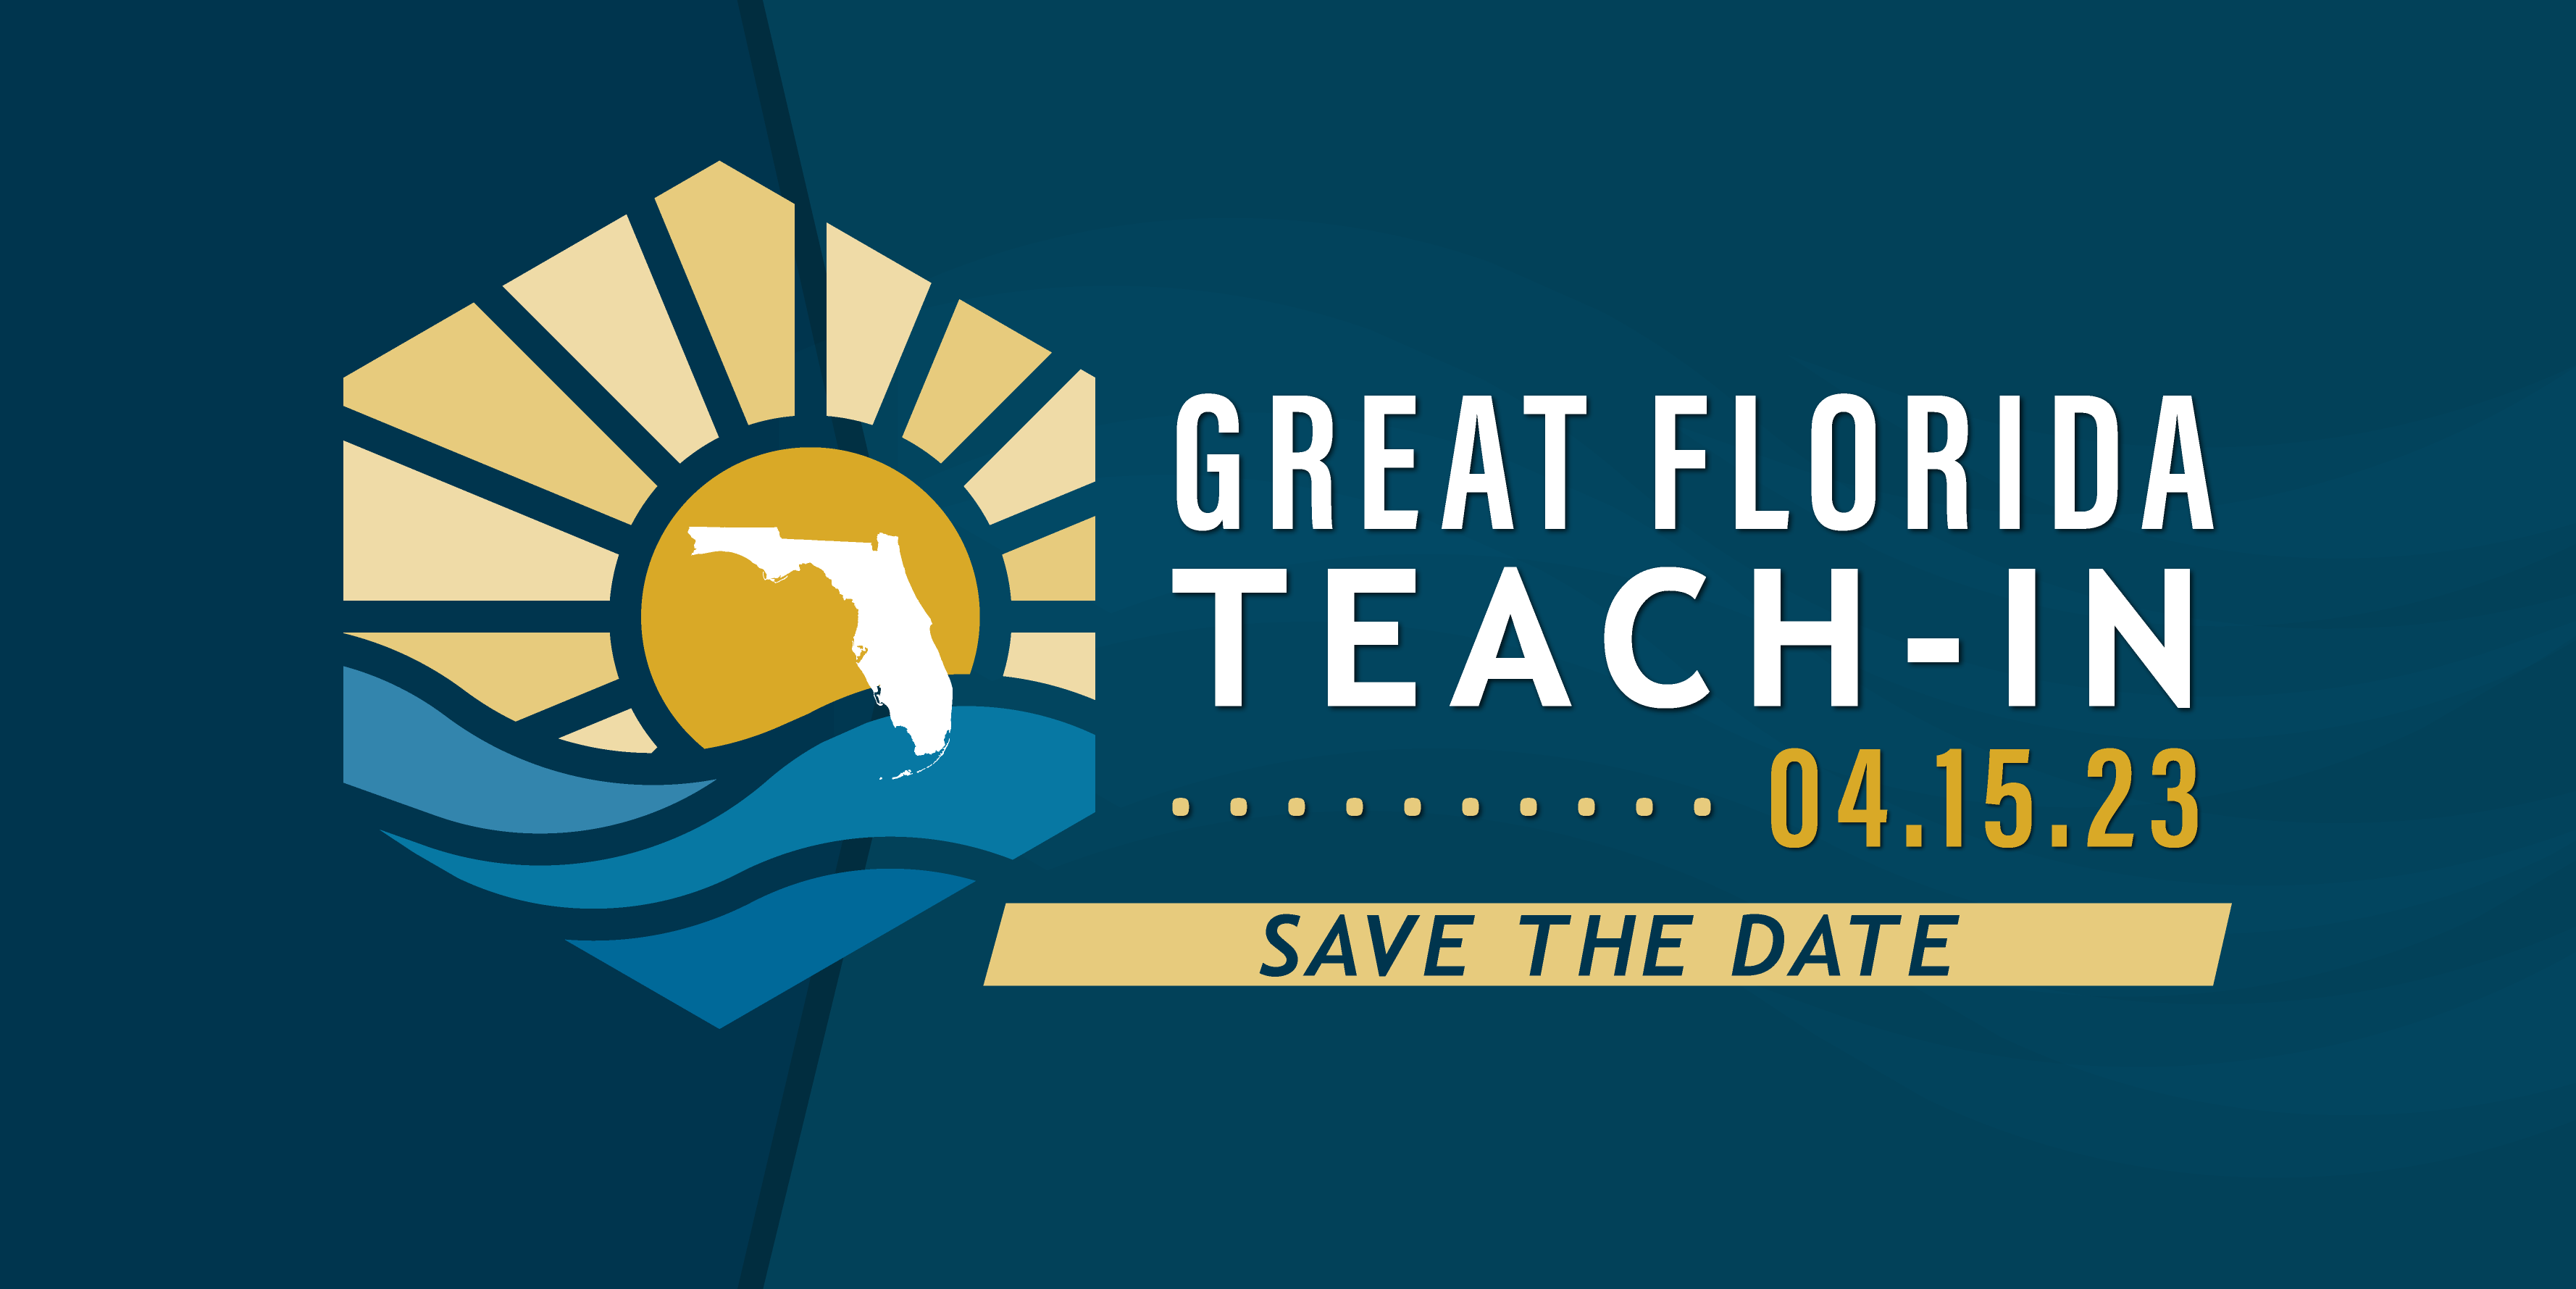 Great Florida Teach-In - Save the Date - April 15, 2023